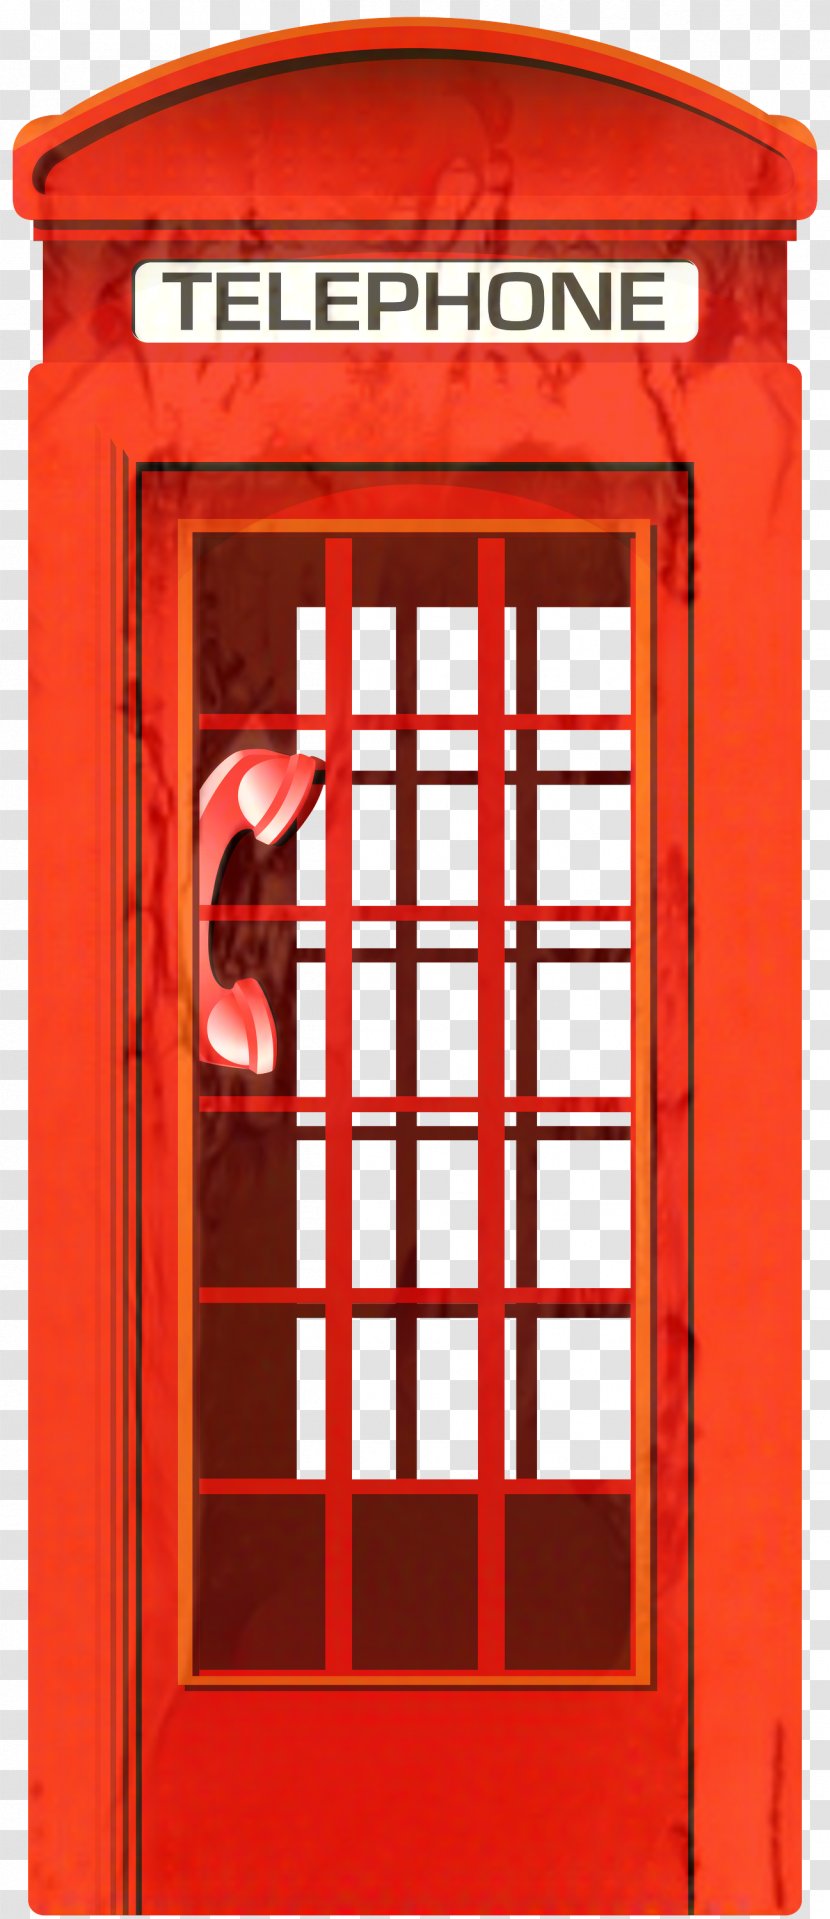 Clip Art Telephone Booth Red Box Image - Police - Drawing Transparent PNG